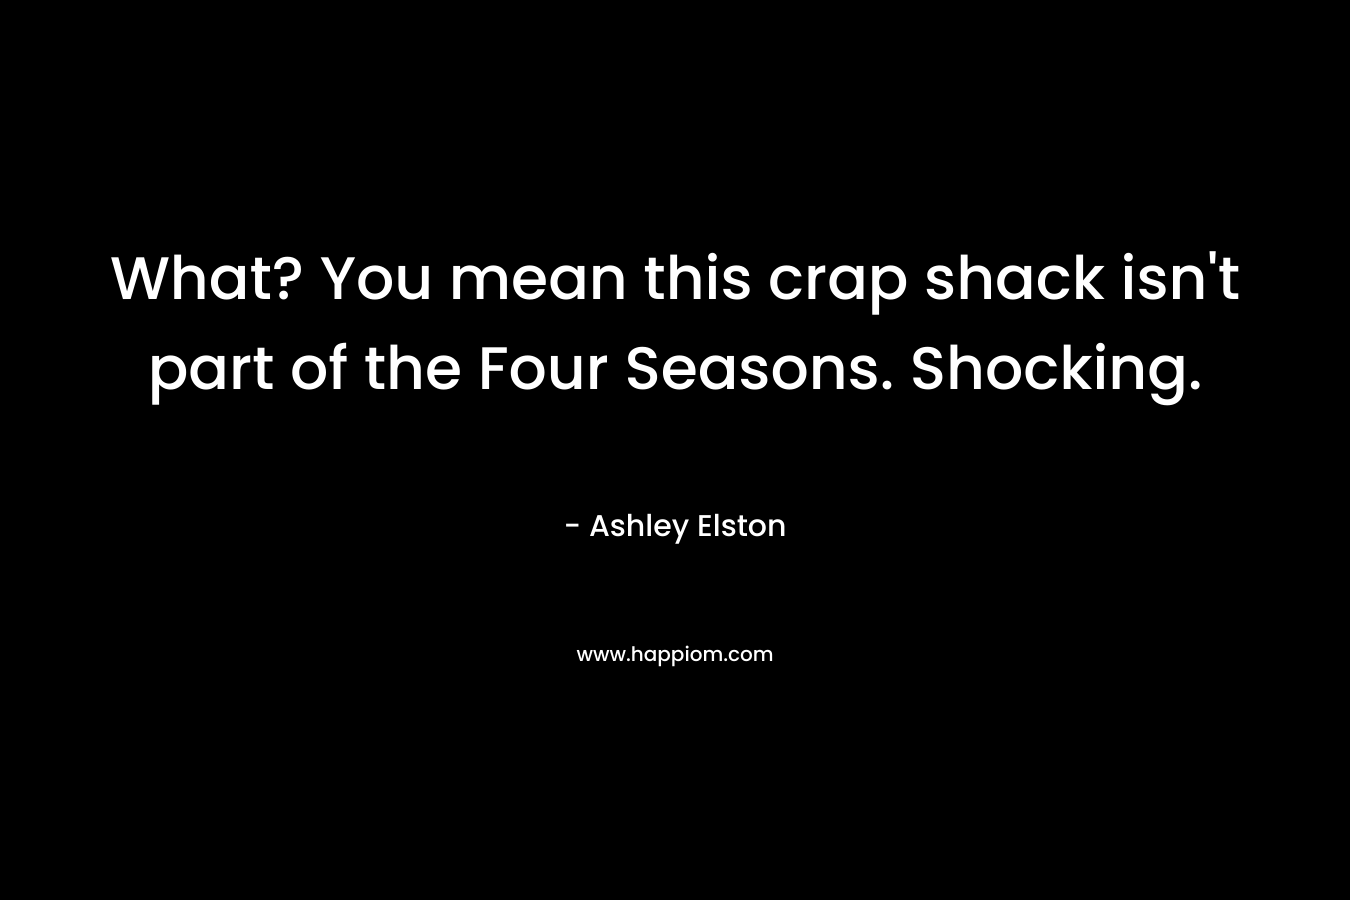 What? You mean this crap shack isn’t part of the Four Seasons. Shocking. – Ashley Elston